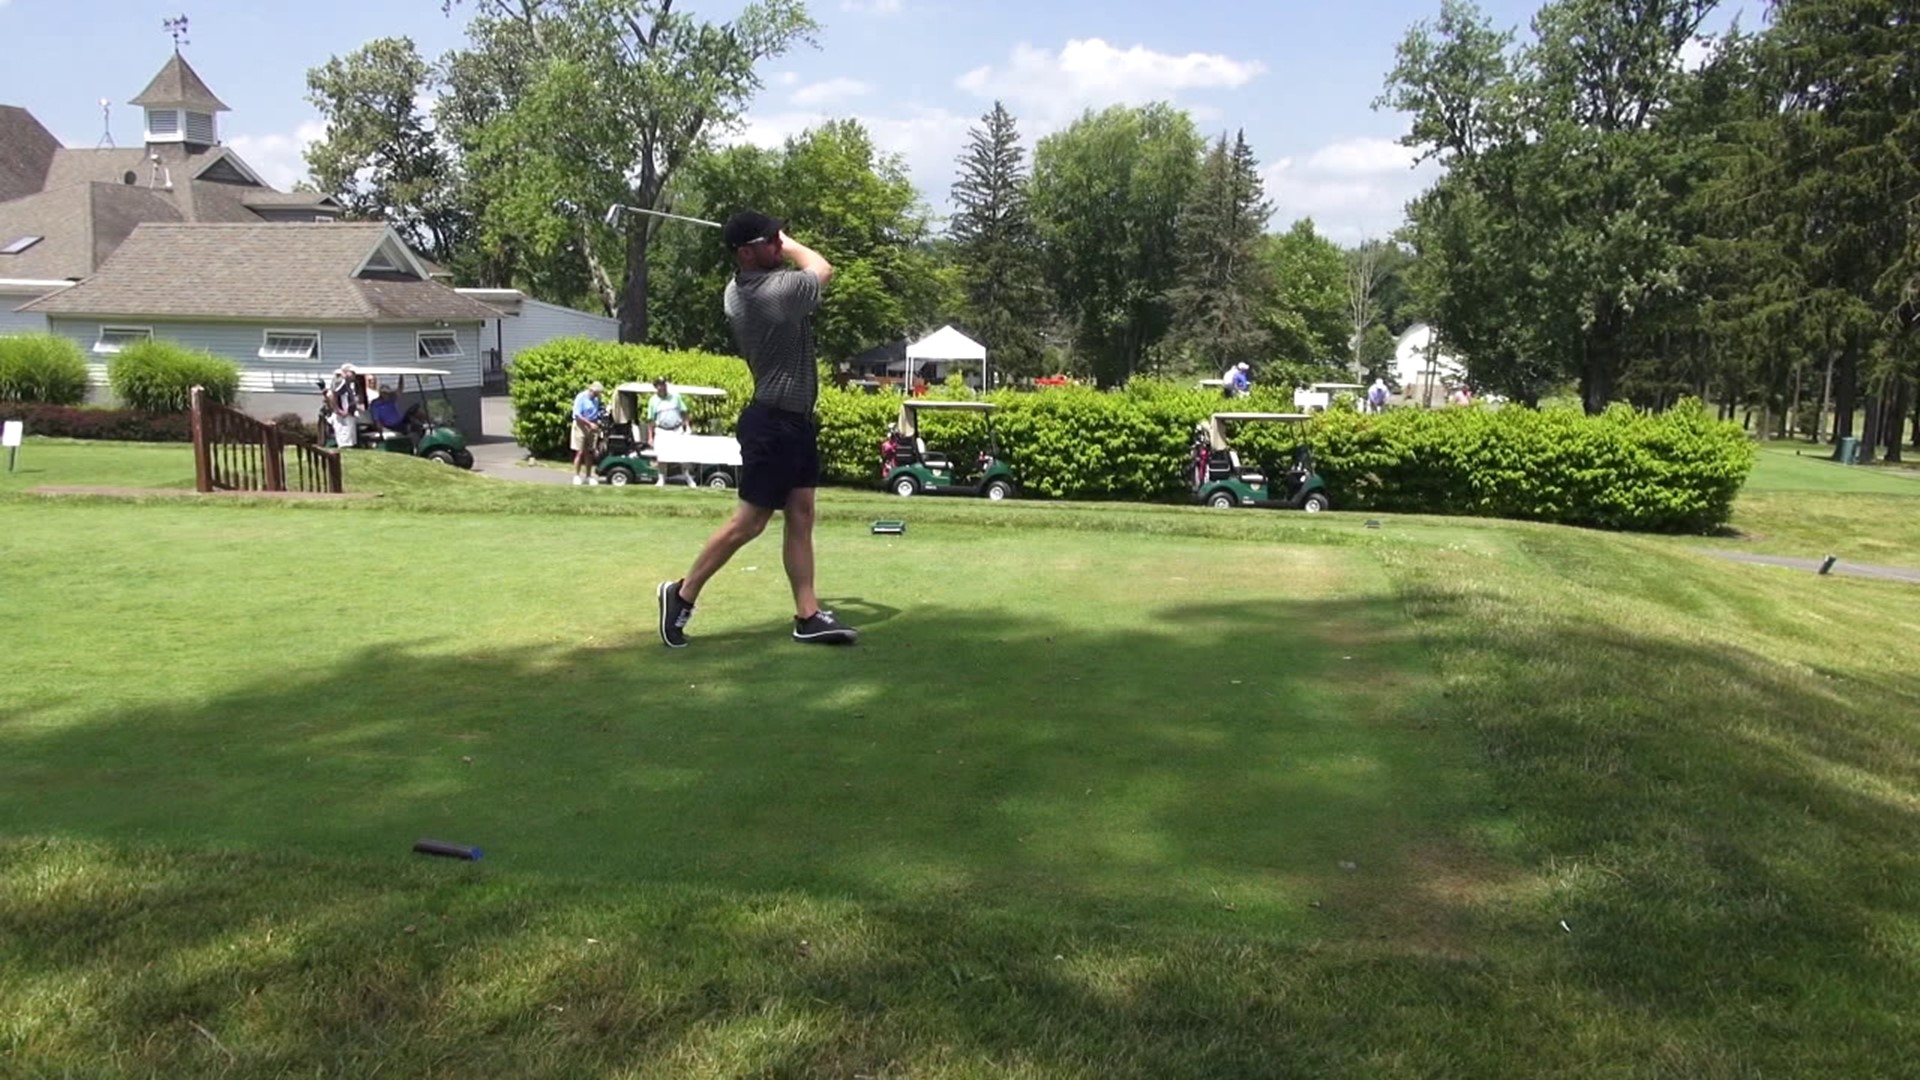 The tournament was underway Monday as a few of Newswatch 16's very own hit the greens for the good cause.